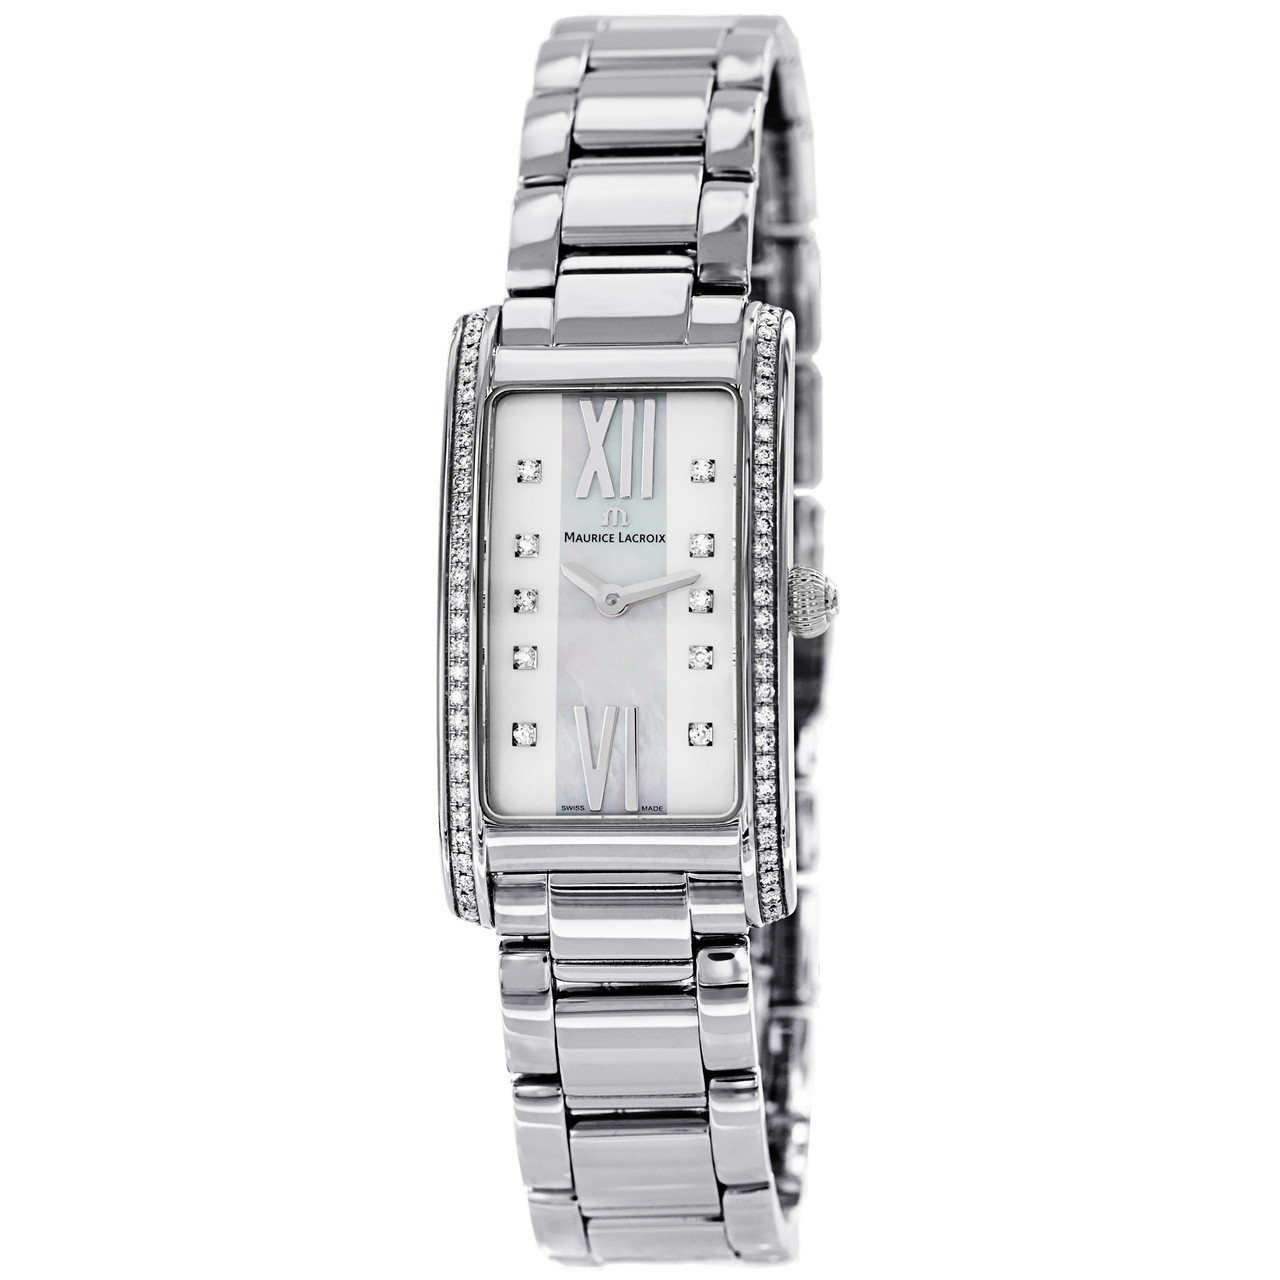 Maurice Lacroix Womens FA2164-SD532-170 Fiaba Mother of Pearl Diamond ...